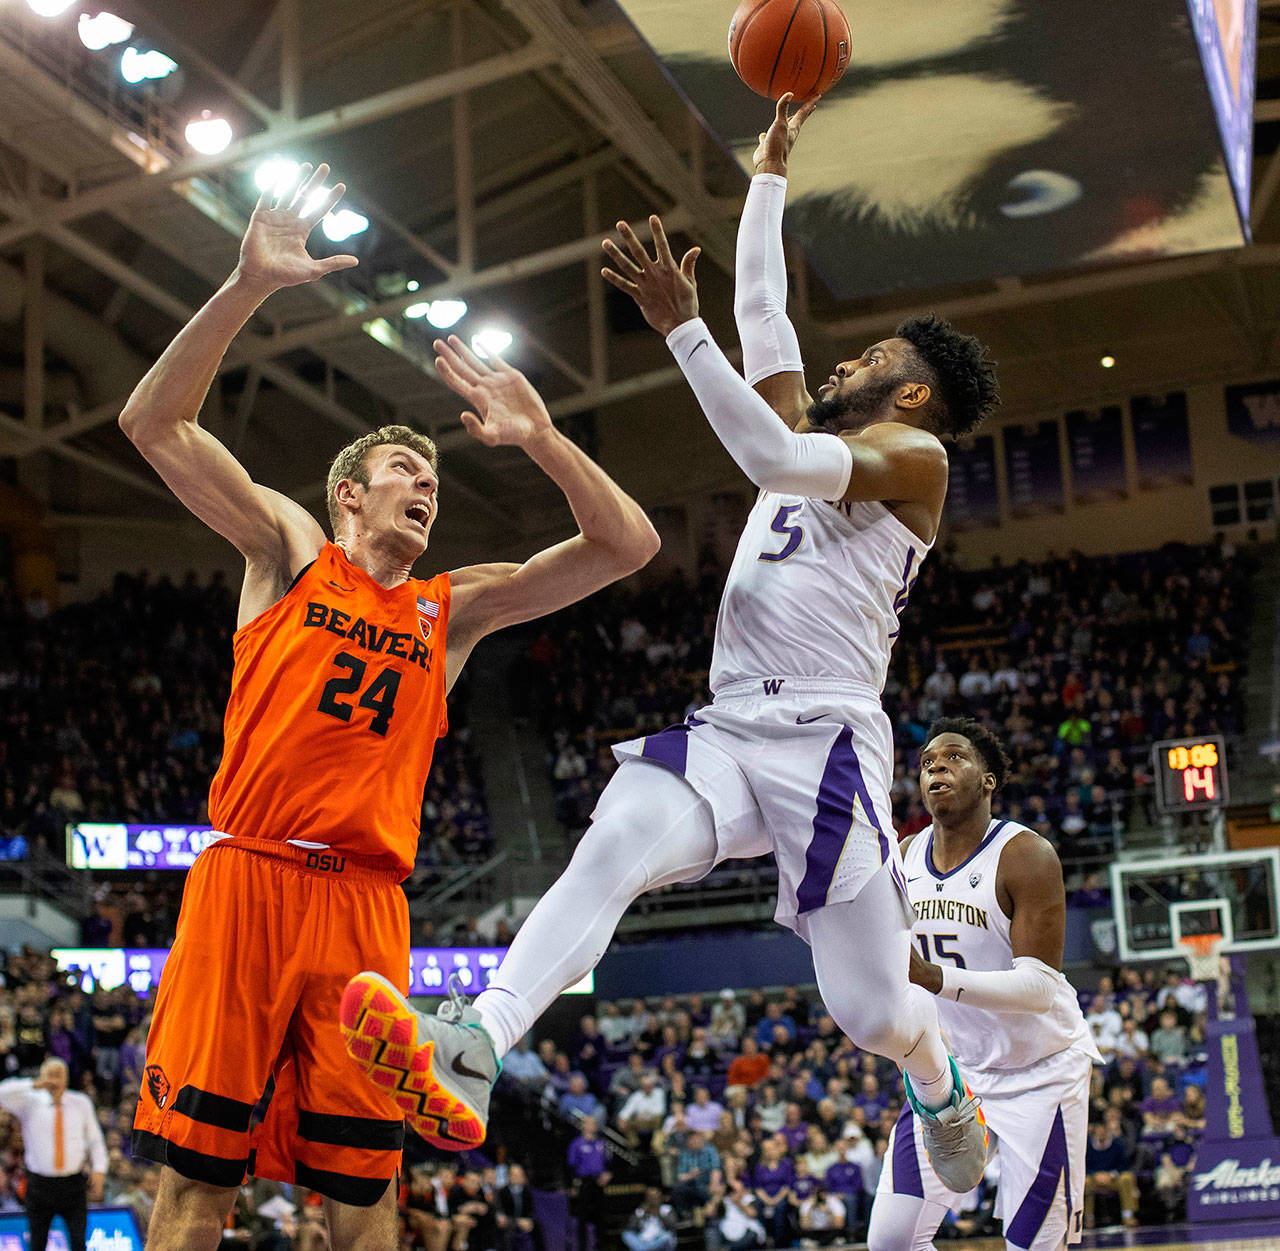 Washington’s Jaylen Nowell puts up a shot over Oregon State’s Kylor Kelley in the second half, giving the Huskies a 48-46 lead over the Beavers with 13:02 to play on Wednesday, March 6, 2019 at Alaska Airlines Arena in Seattle, Wash. (Dean Rutz/Seattle Times/TNS)